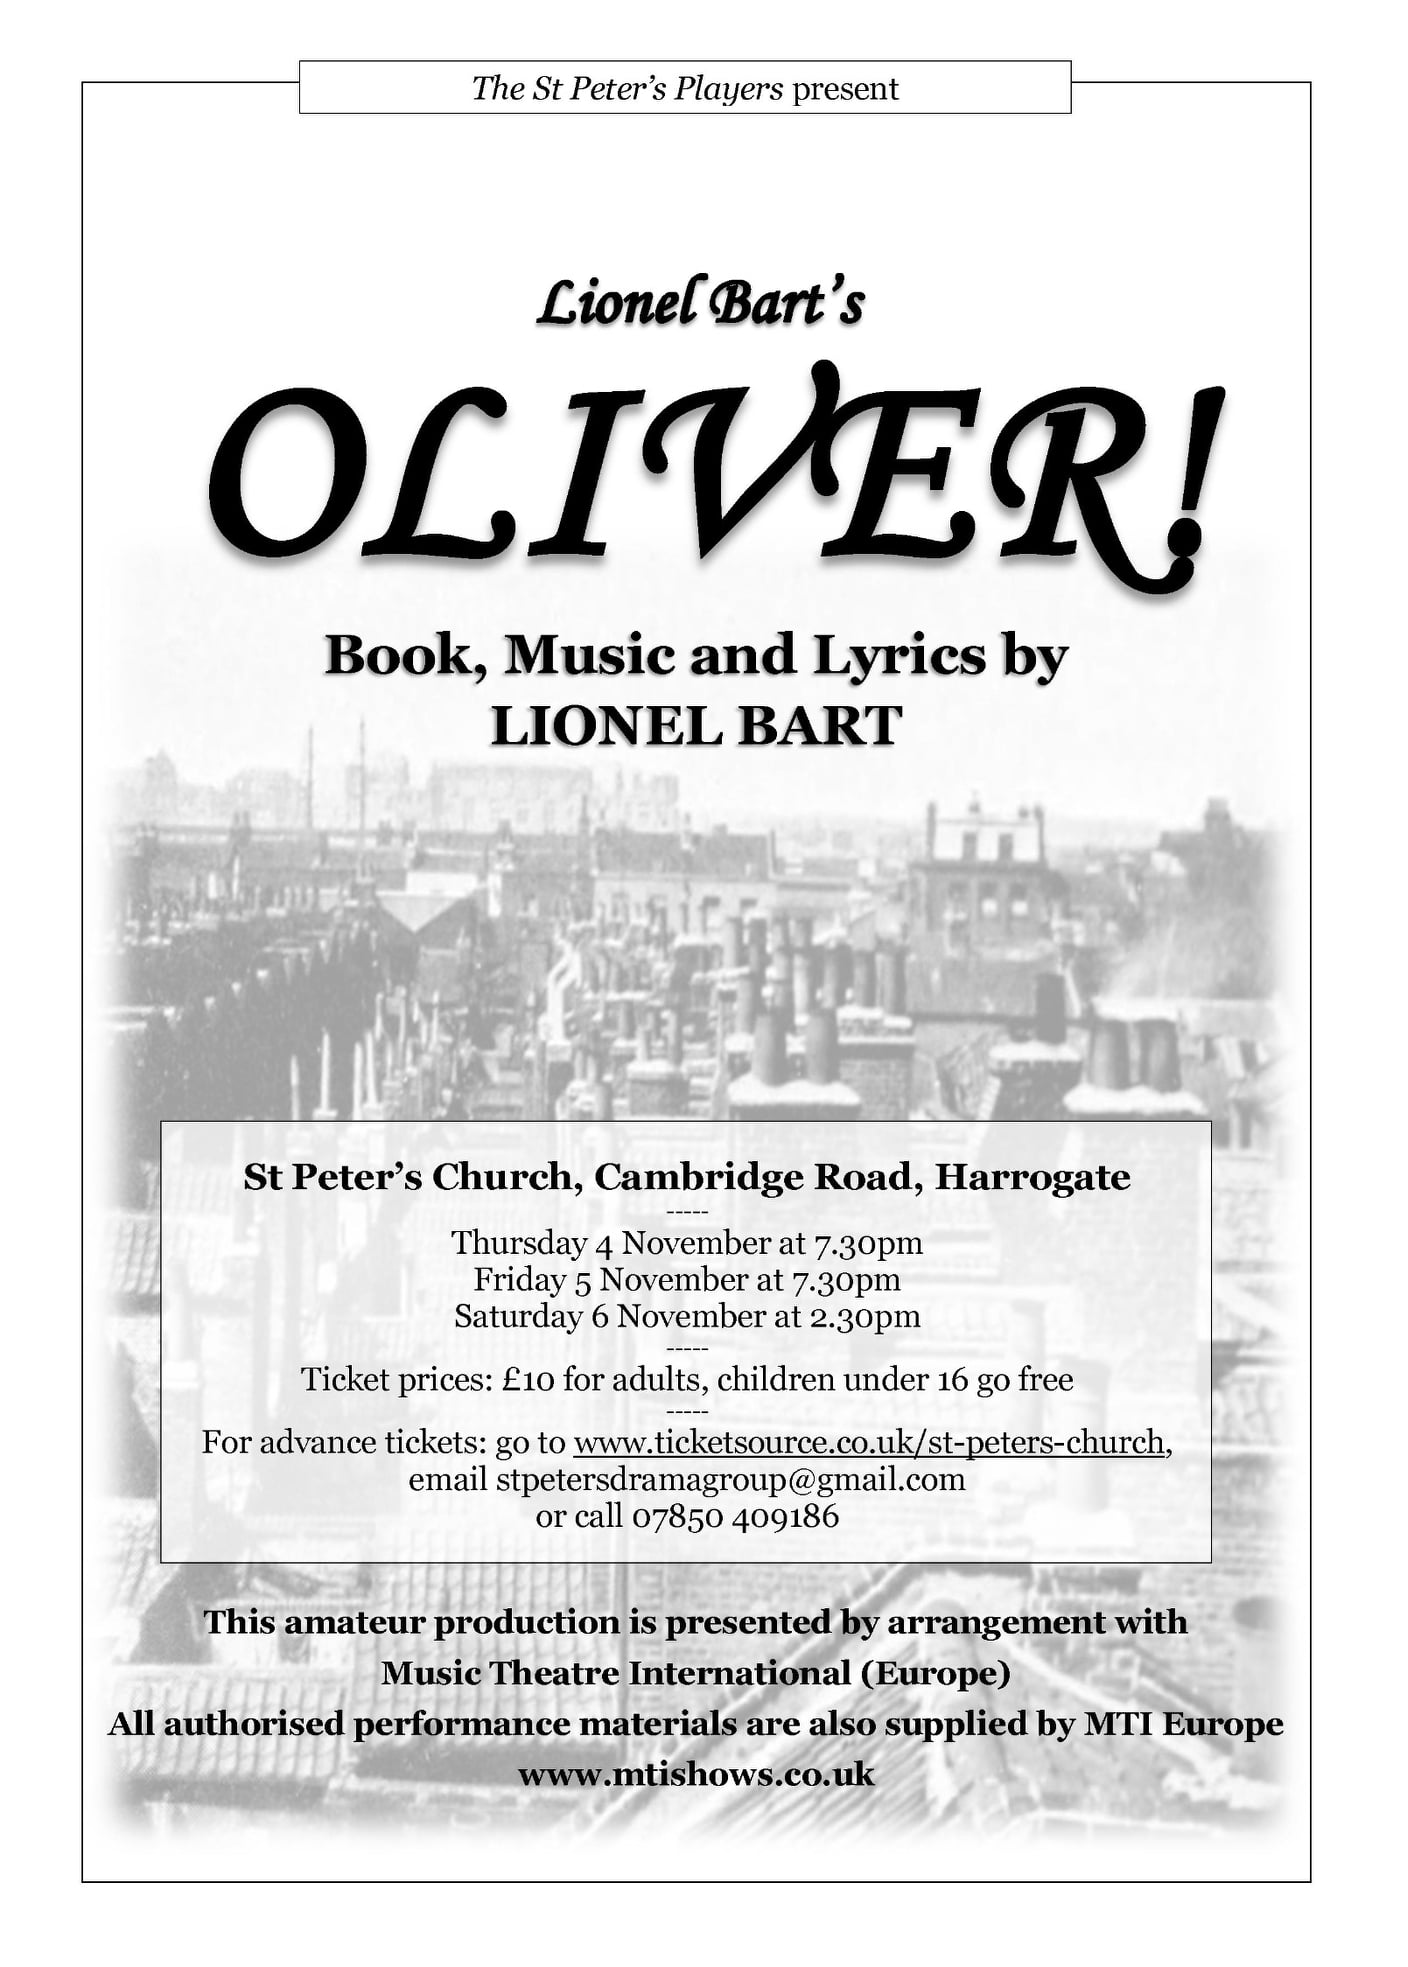 St. Peter’s Players production of Oliver!